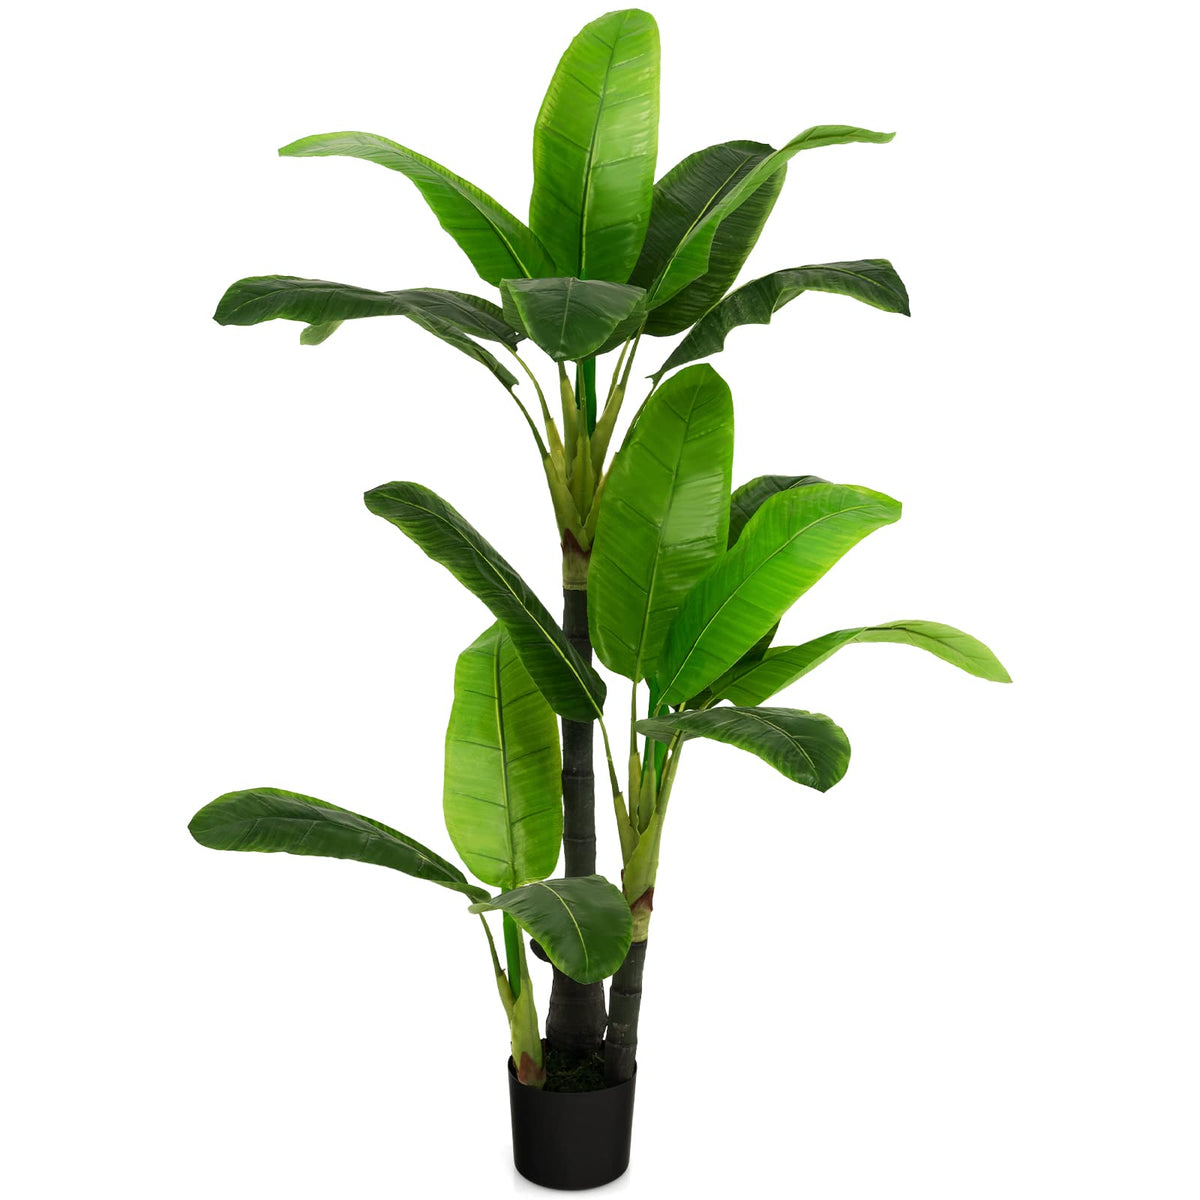 Goplus 5ft Bird of Paradise Artificial Plant, Fake Tropical Palm Tree with 18 Large Leaves - GoplusUS